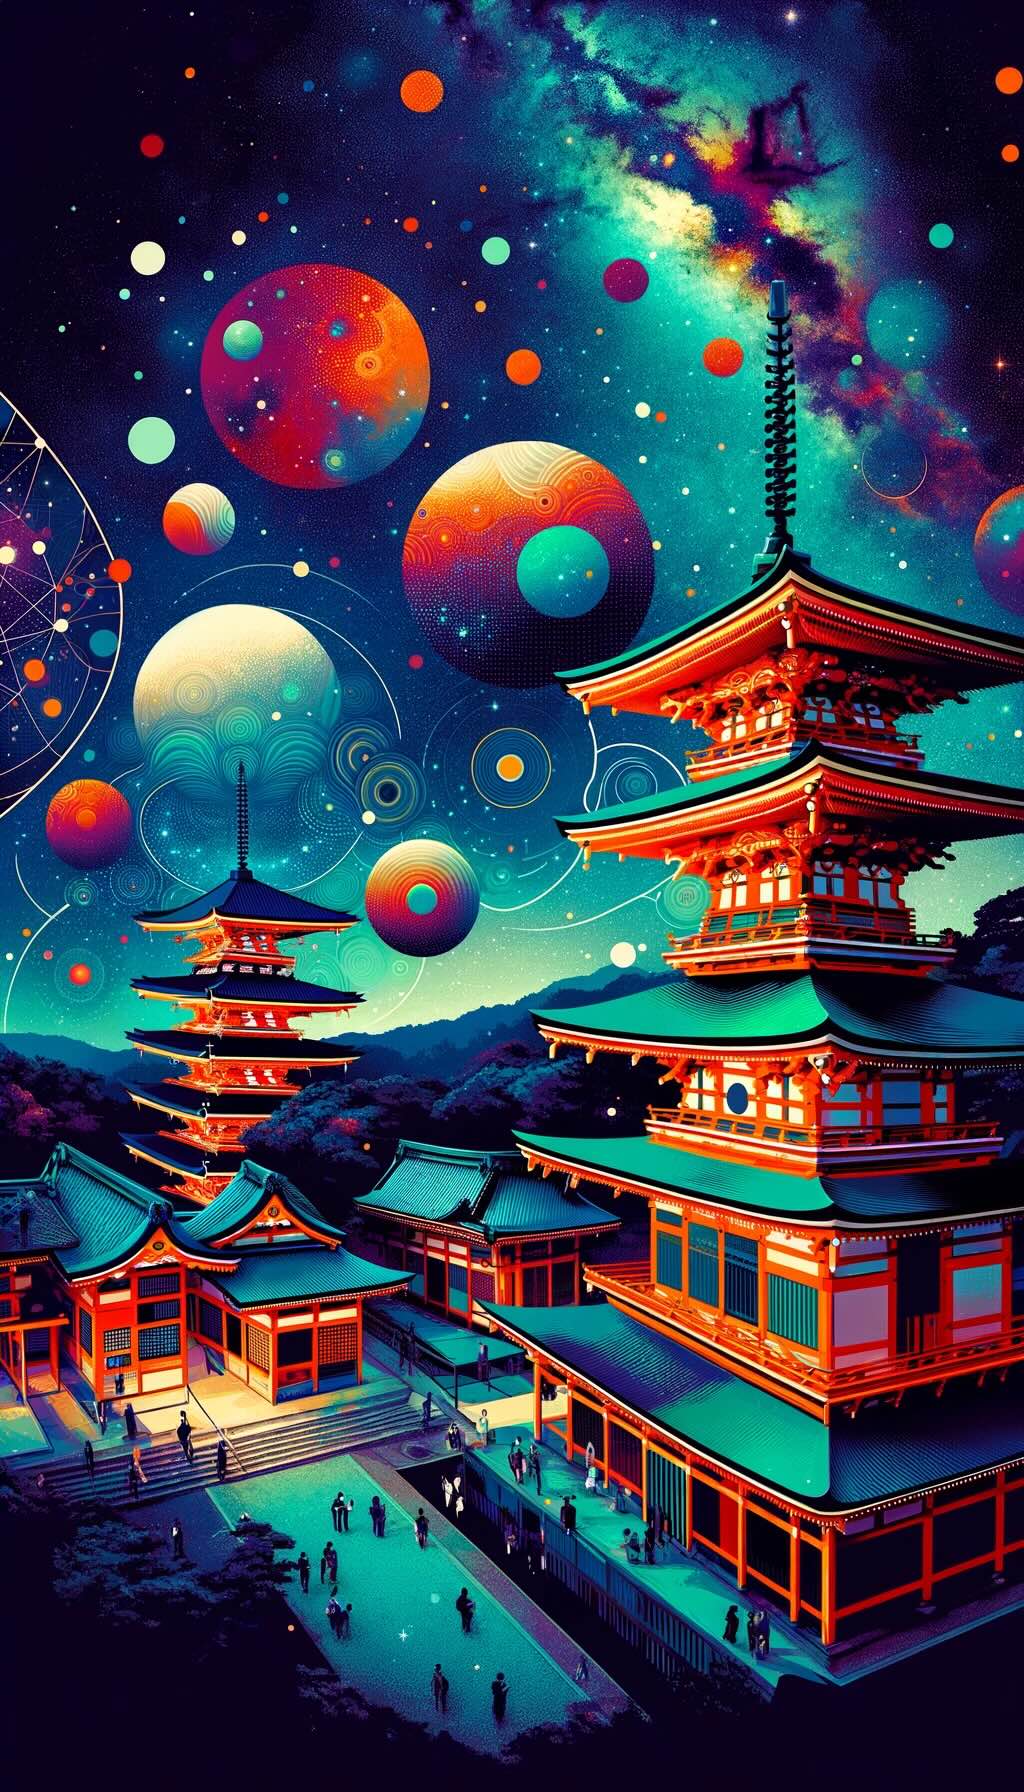 Beautifully captures the essence of night photography at cultural and historical sites in Japan showcases temples and shrines like Kiyomizu-dera in Kyoto, Itsukushima Shrine in Miyajima, and Toshogu Shrine in Nikko under a star-filled sky blends ancient architecture with celestial wonders, creating surreal and majestic scenes. 